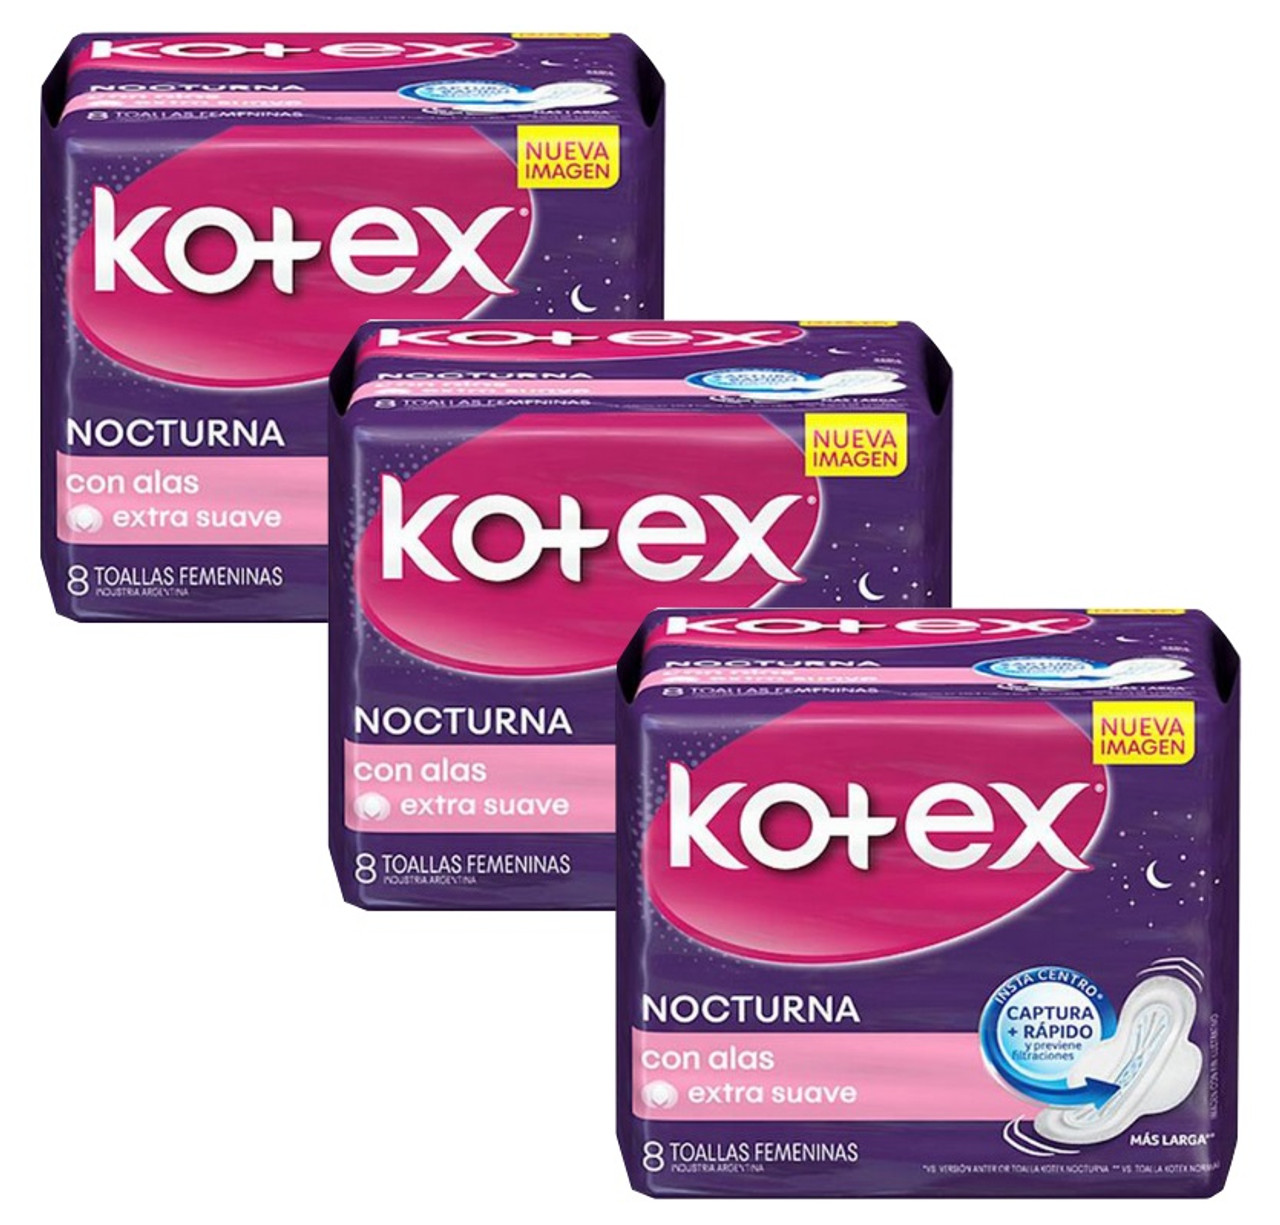 Kotex Toallitas Nocturnas Extra Soft Feminine Pads with Wings Long  Overnight Pads, 8 count (pack of